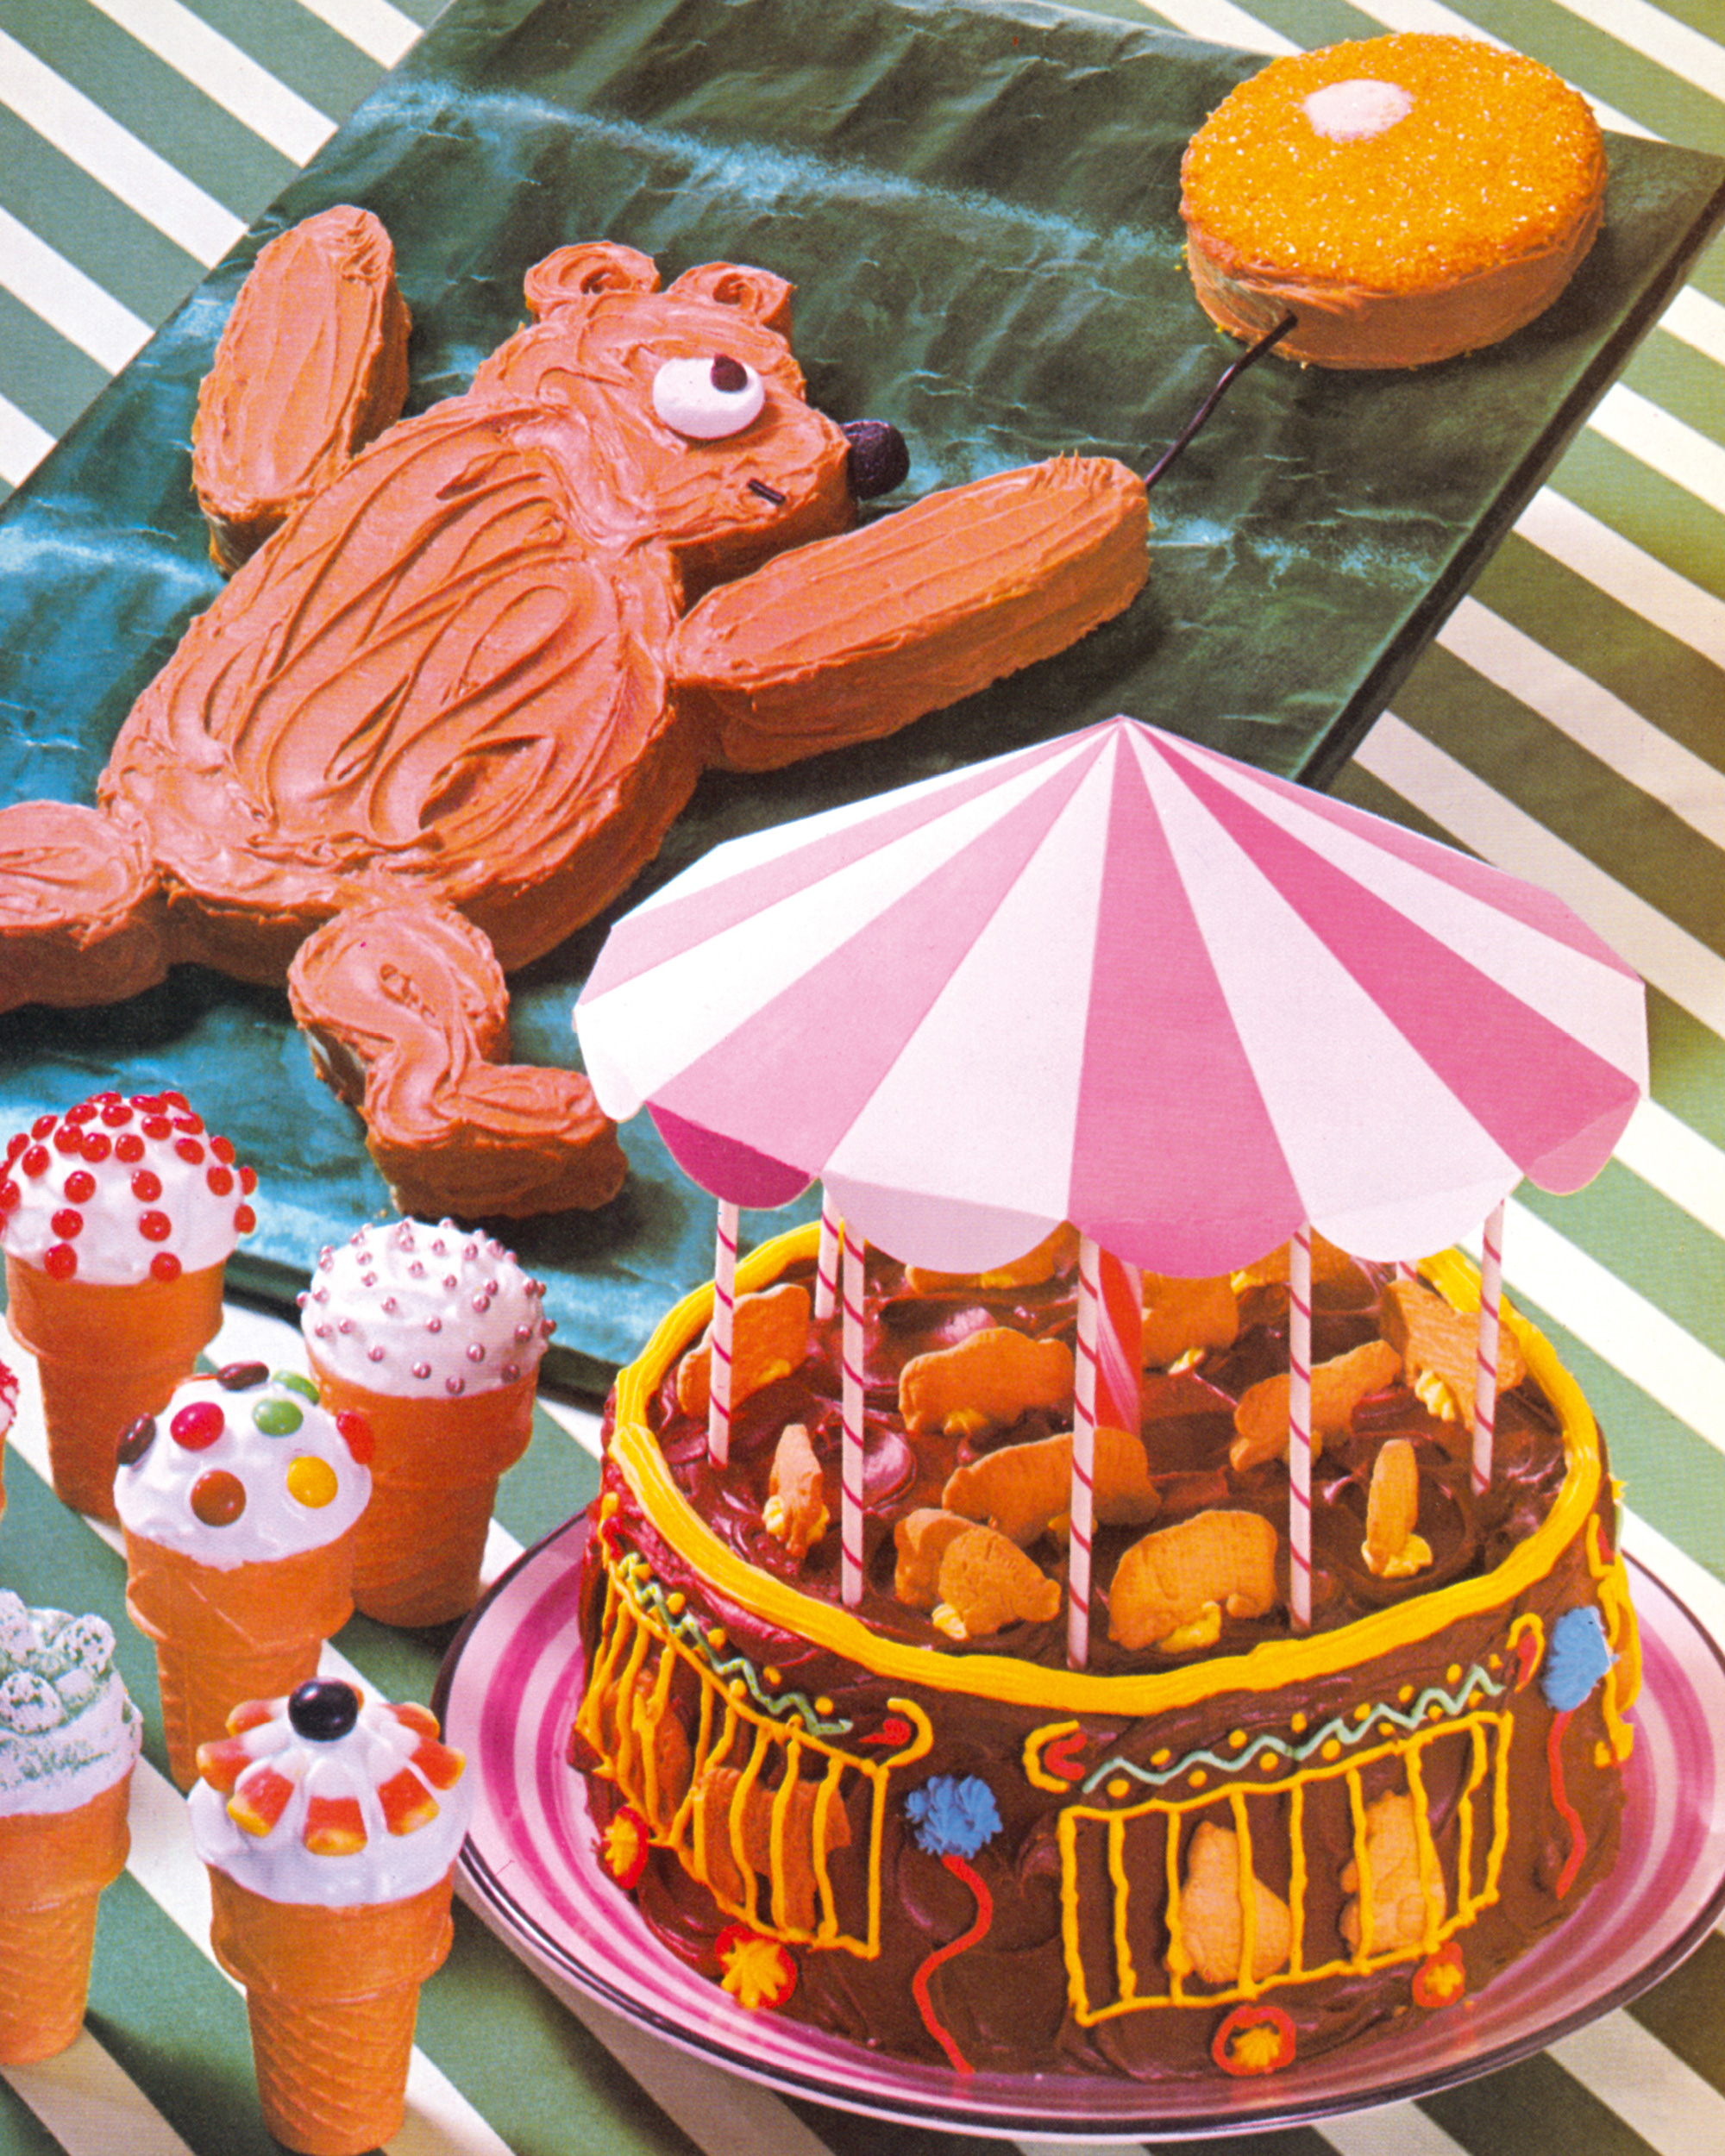 A photograph of cakes in the shape of a bear, ice creams, and a merry-go-round from Betty Crocker’s nineteen sixty-six “Cake and Frosting Mix Cookbook.”